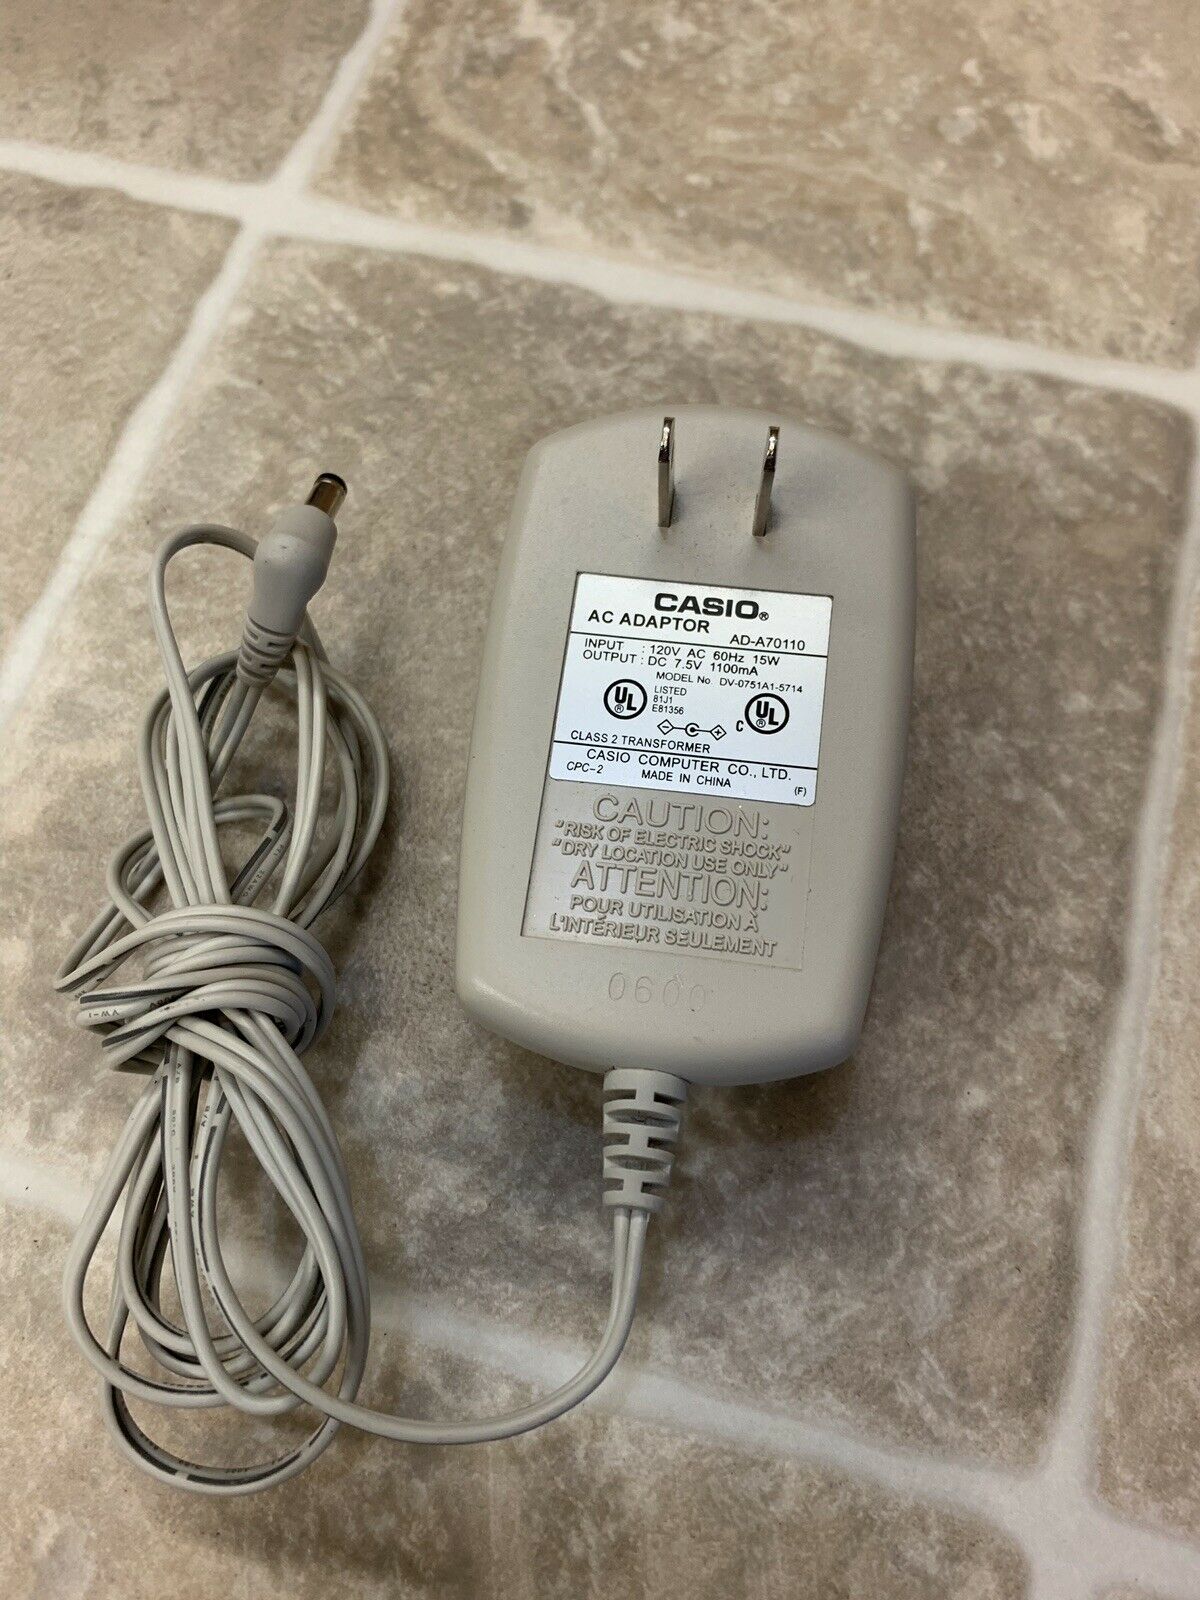 *Brand NEW*AD-A70110 Casio 7.5 V 1100 mA AC DC Adapter POWER SUPPLY